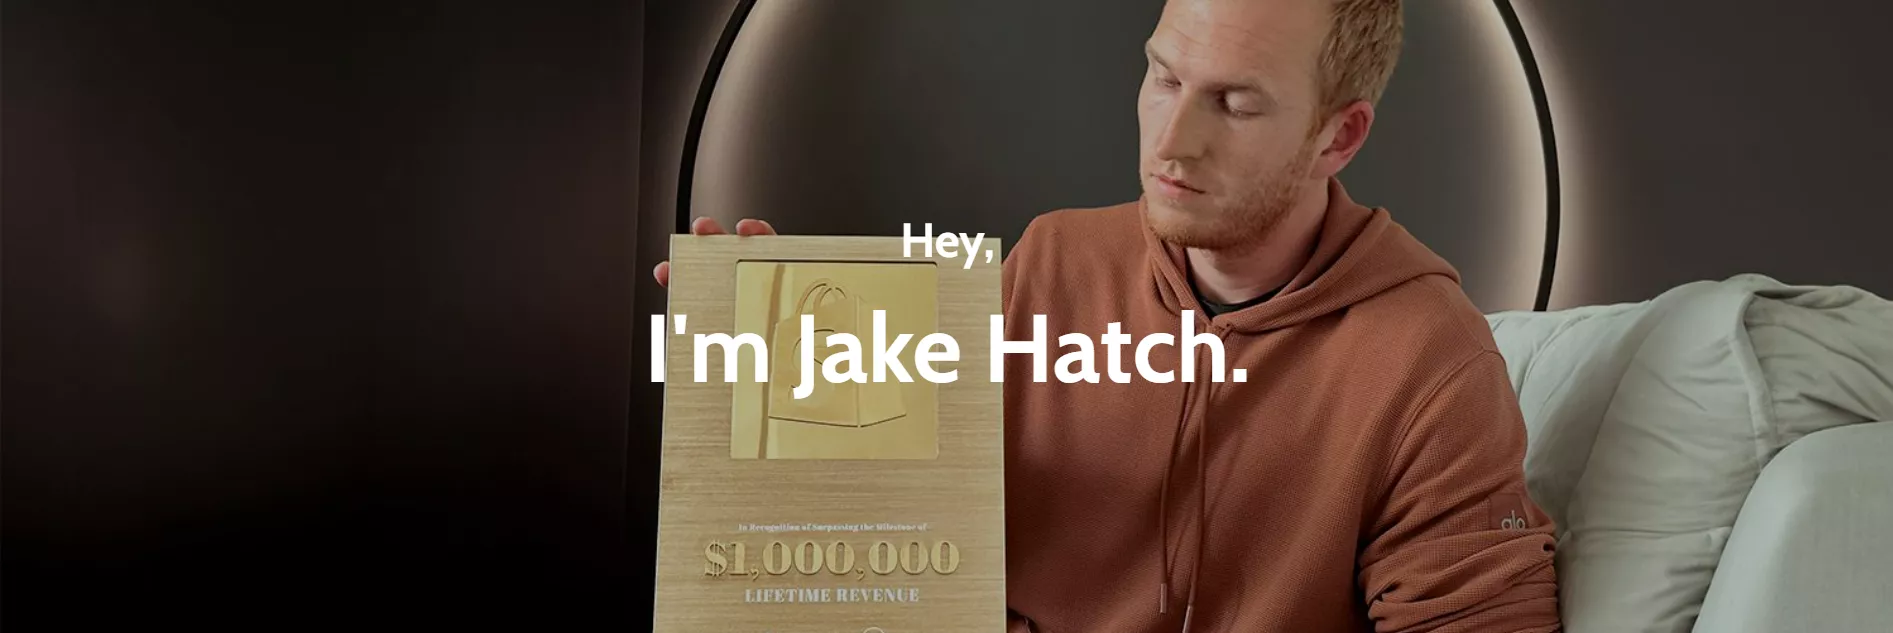 Jake Hatch And His Hatch Method